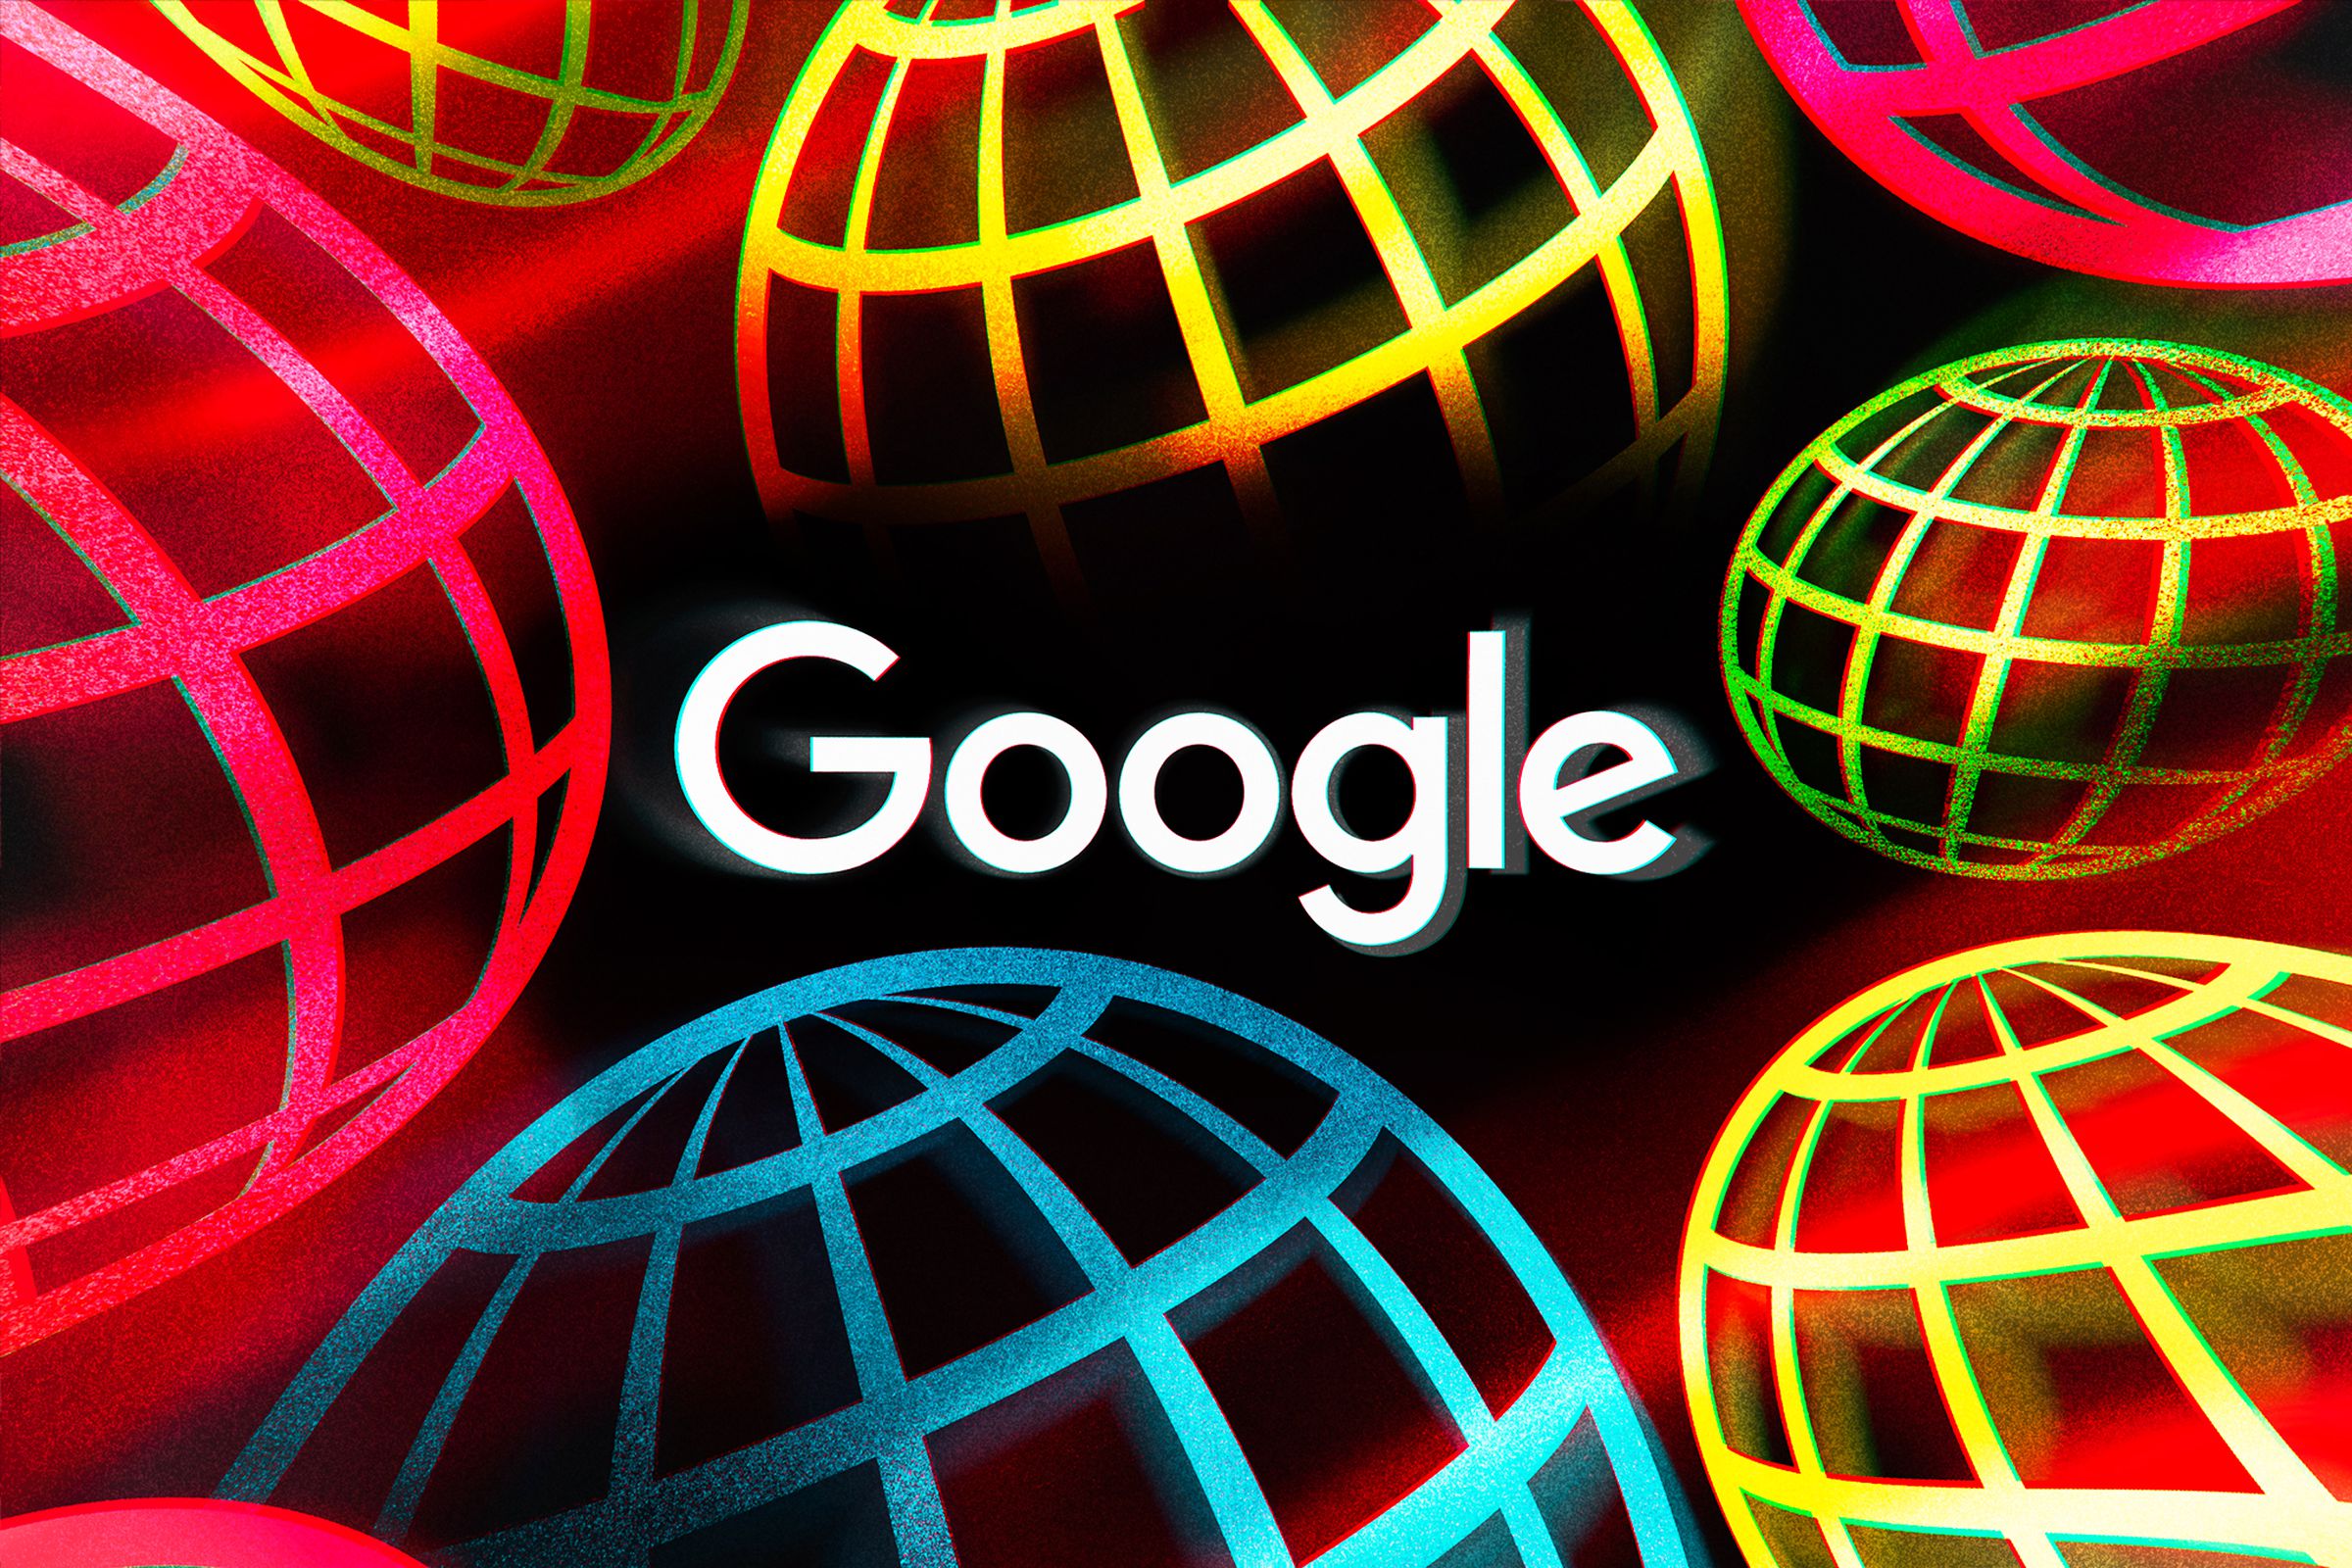 Google’s MVNO wireless service adds another, more conventional plan option.